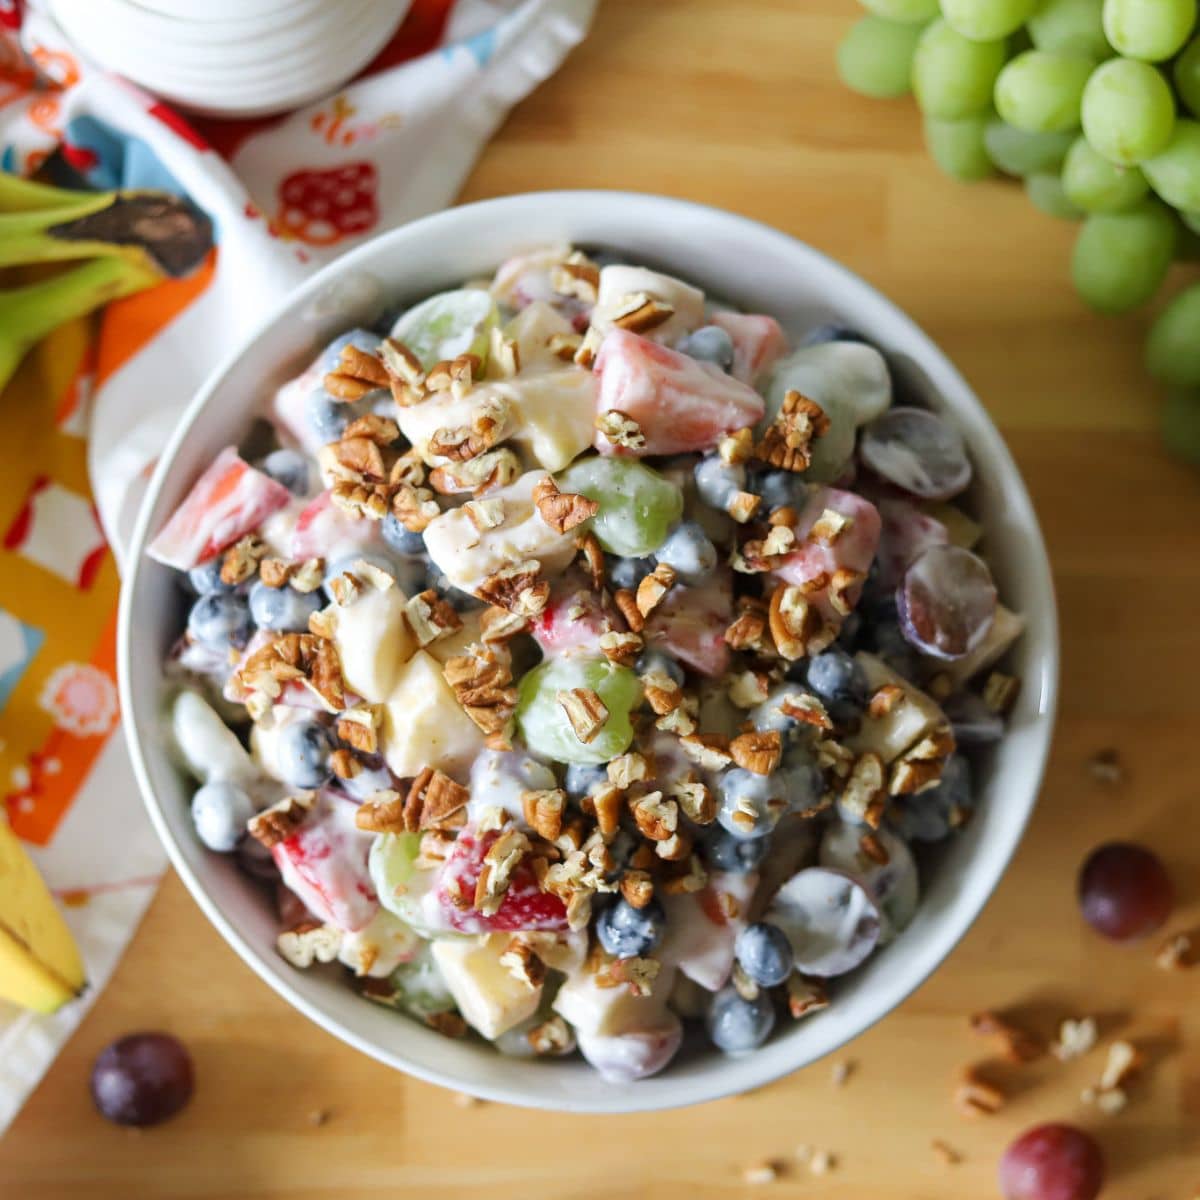 a bowl of fruit salad coasted in. a creamy yogurt sauce and topped with pecans